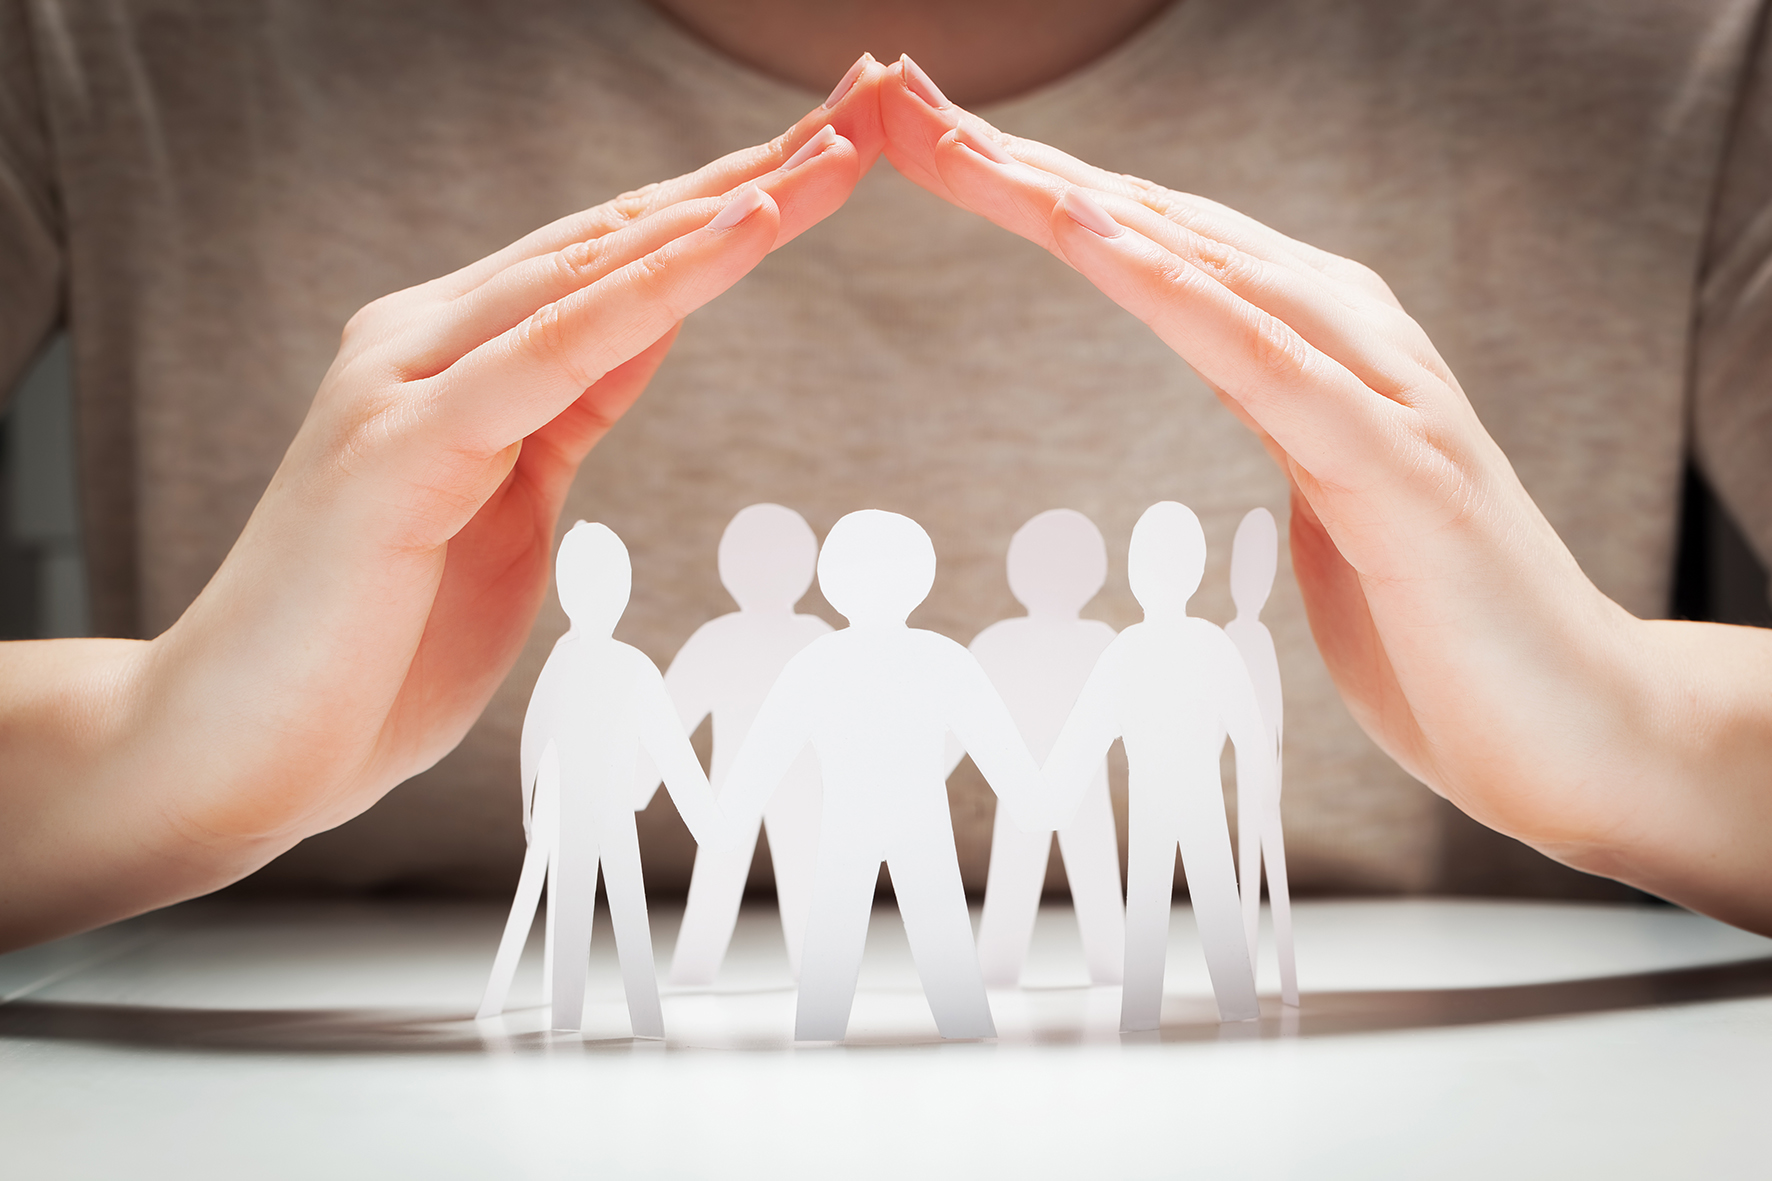 paper-people-under-hands-in-gesture-of-protection-concept-of-insurance